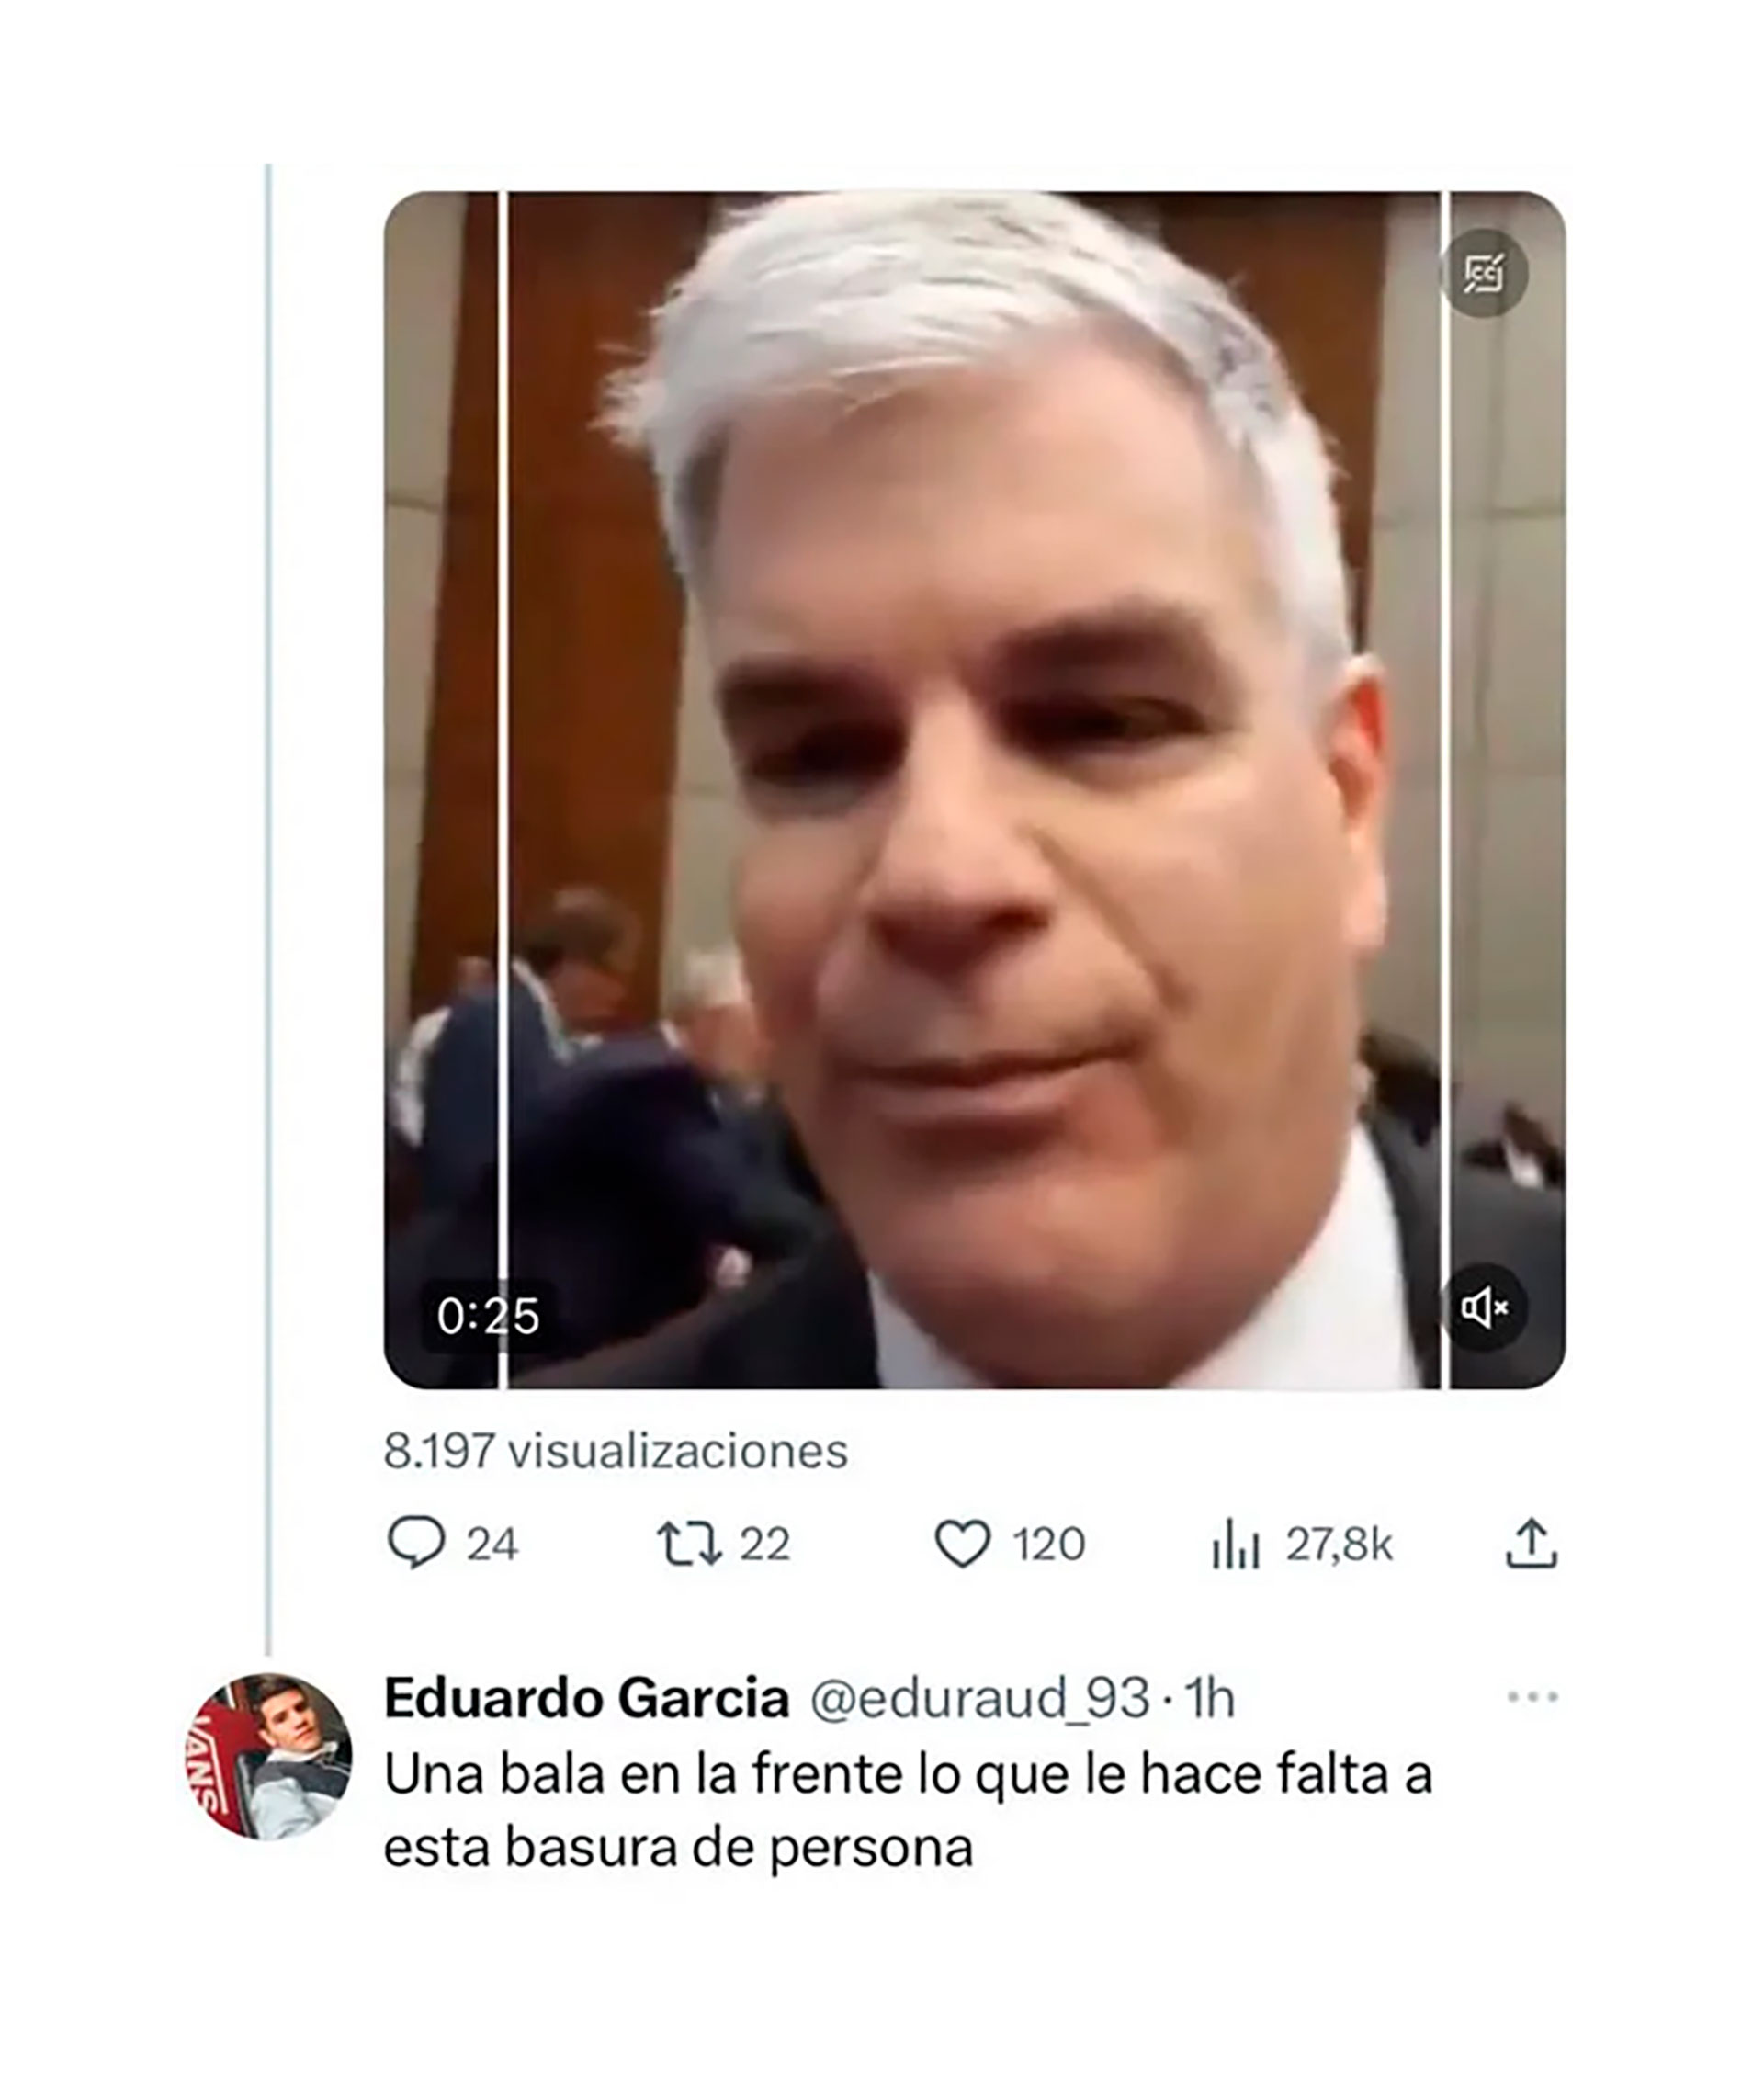 The threat to the US ambassador in Paraguay